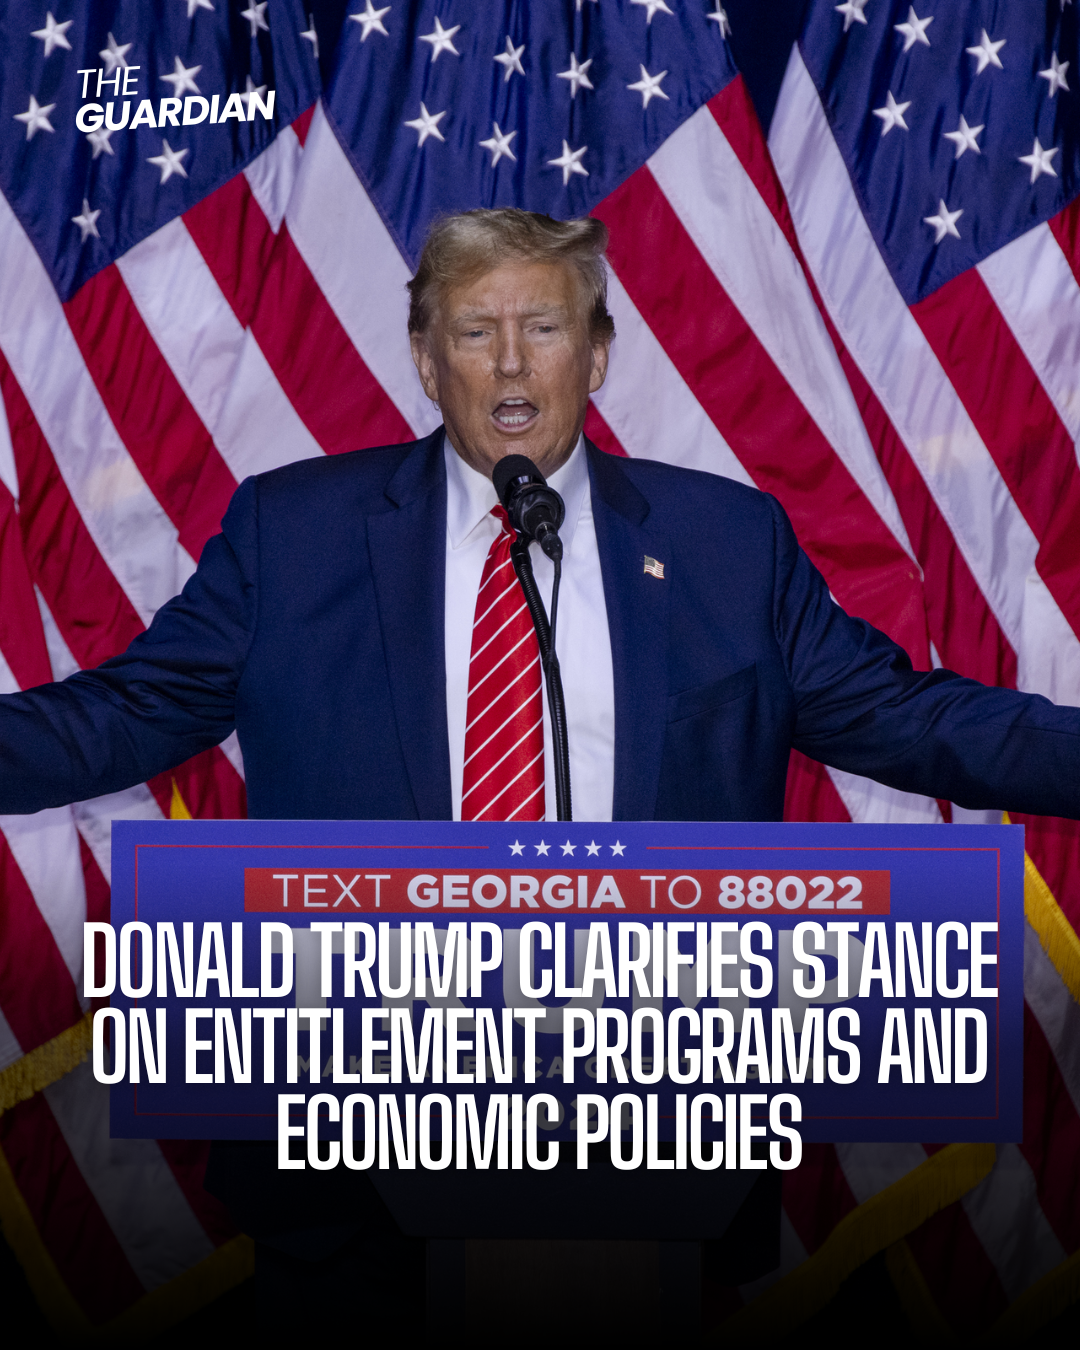 Donald Trump's recent comments about social programmes and economic policies have aroused debate and criticism.